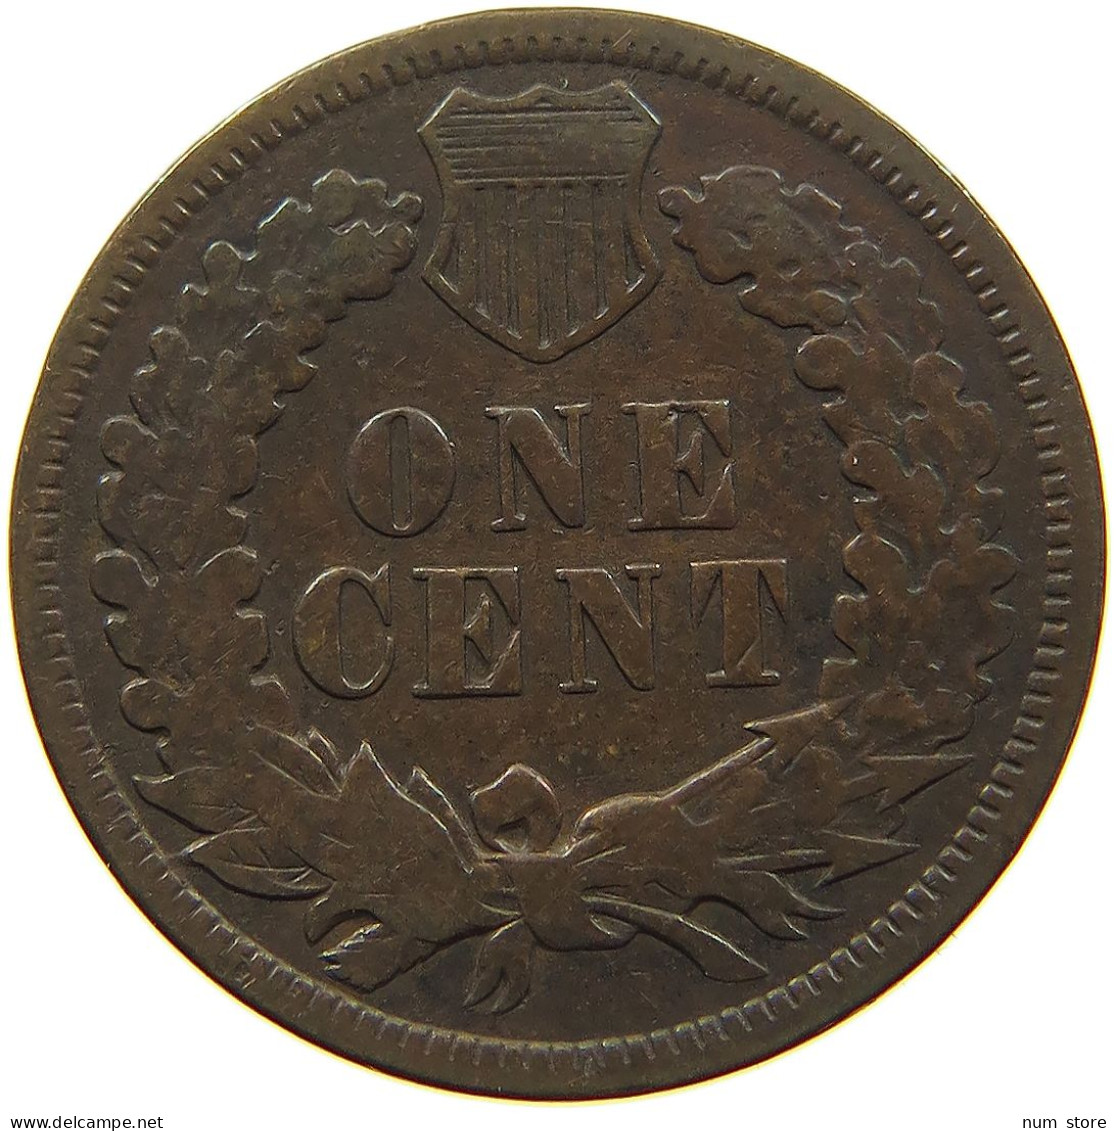 UNITED STATES OF AMERICA CENT 1890 INDIAN HEAD #s063 0281 - 1859-1909: Indian Head